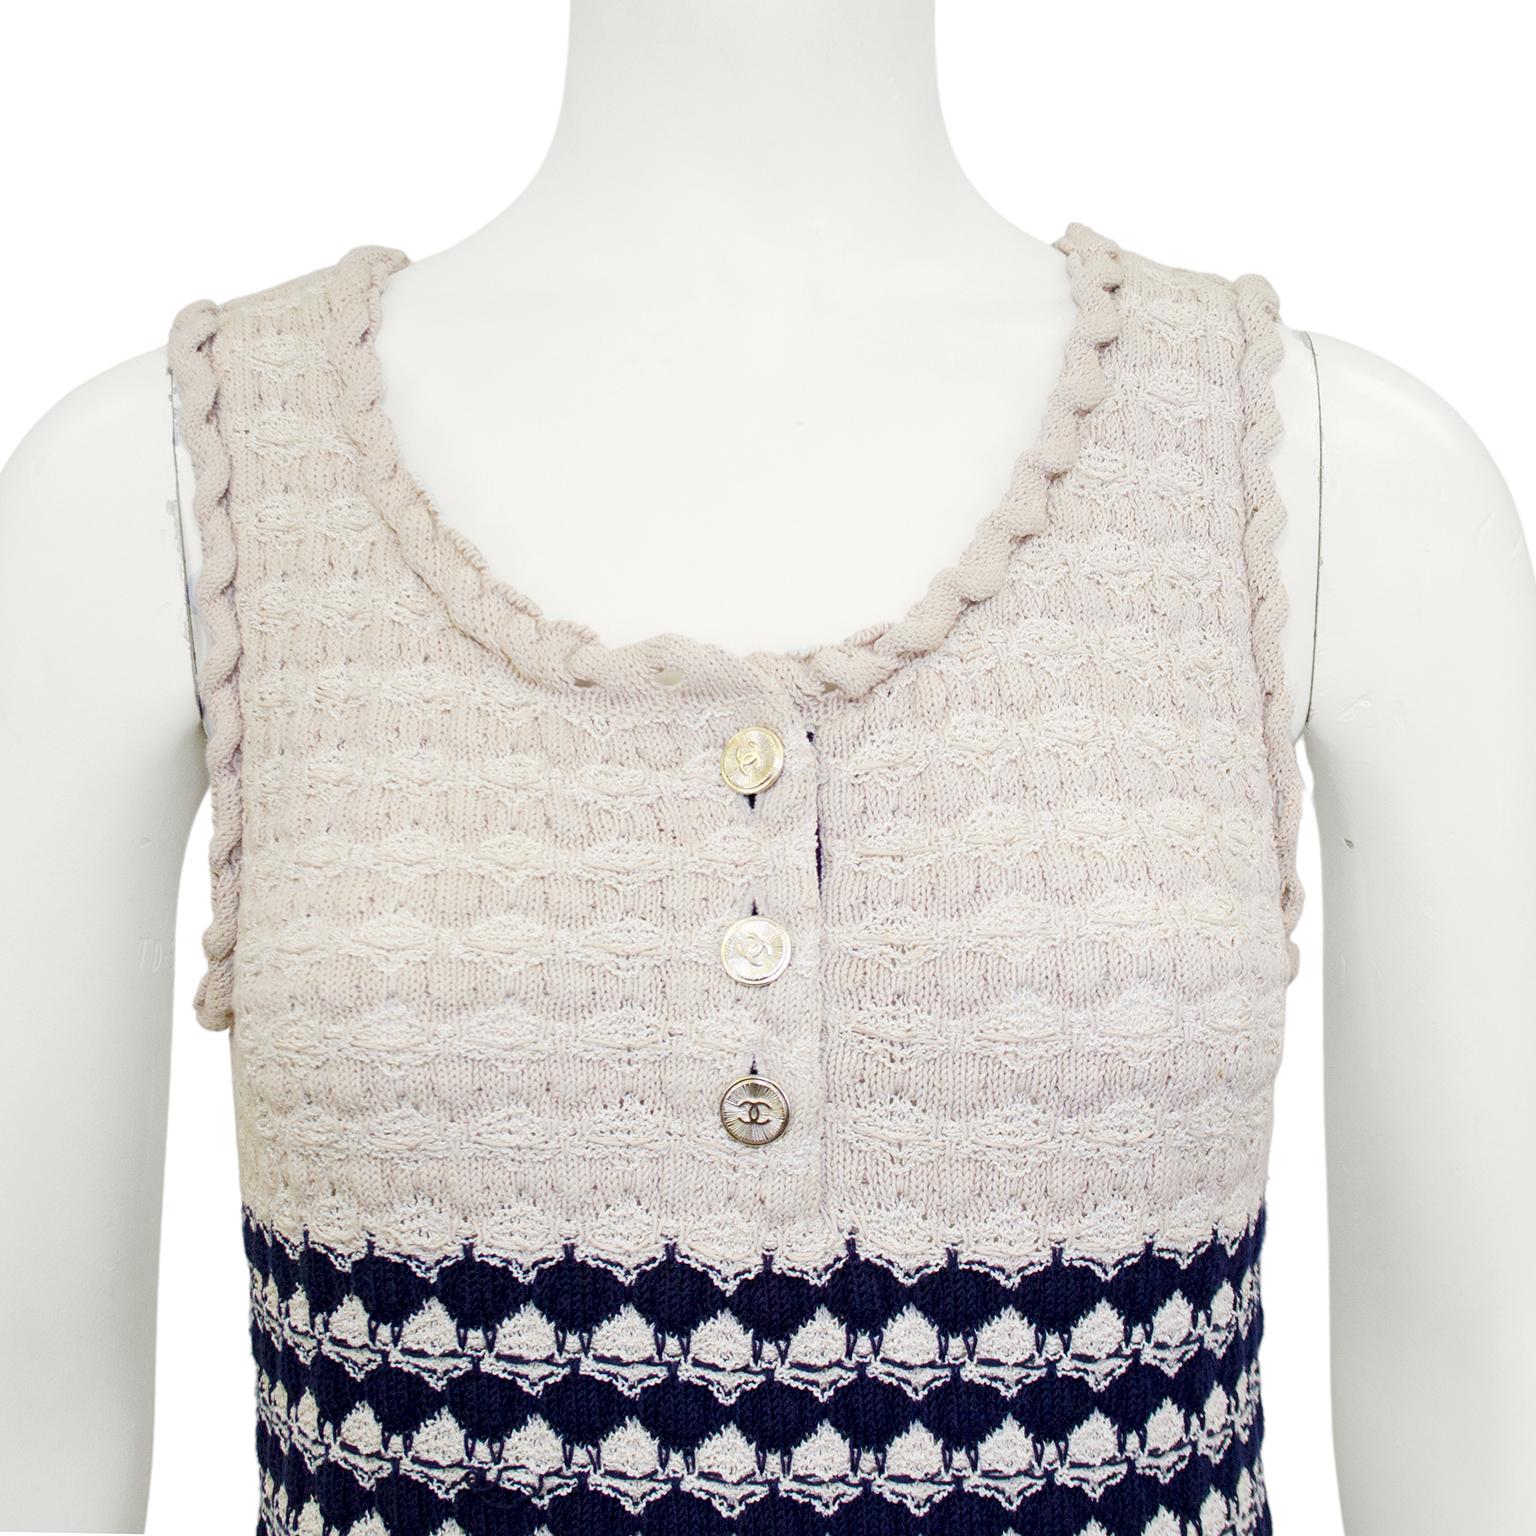 Chanel Spring/Summer 2012 Beige and Navy Knit Dress  In Good Condition For Sale In Toronto, Ontario